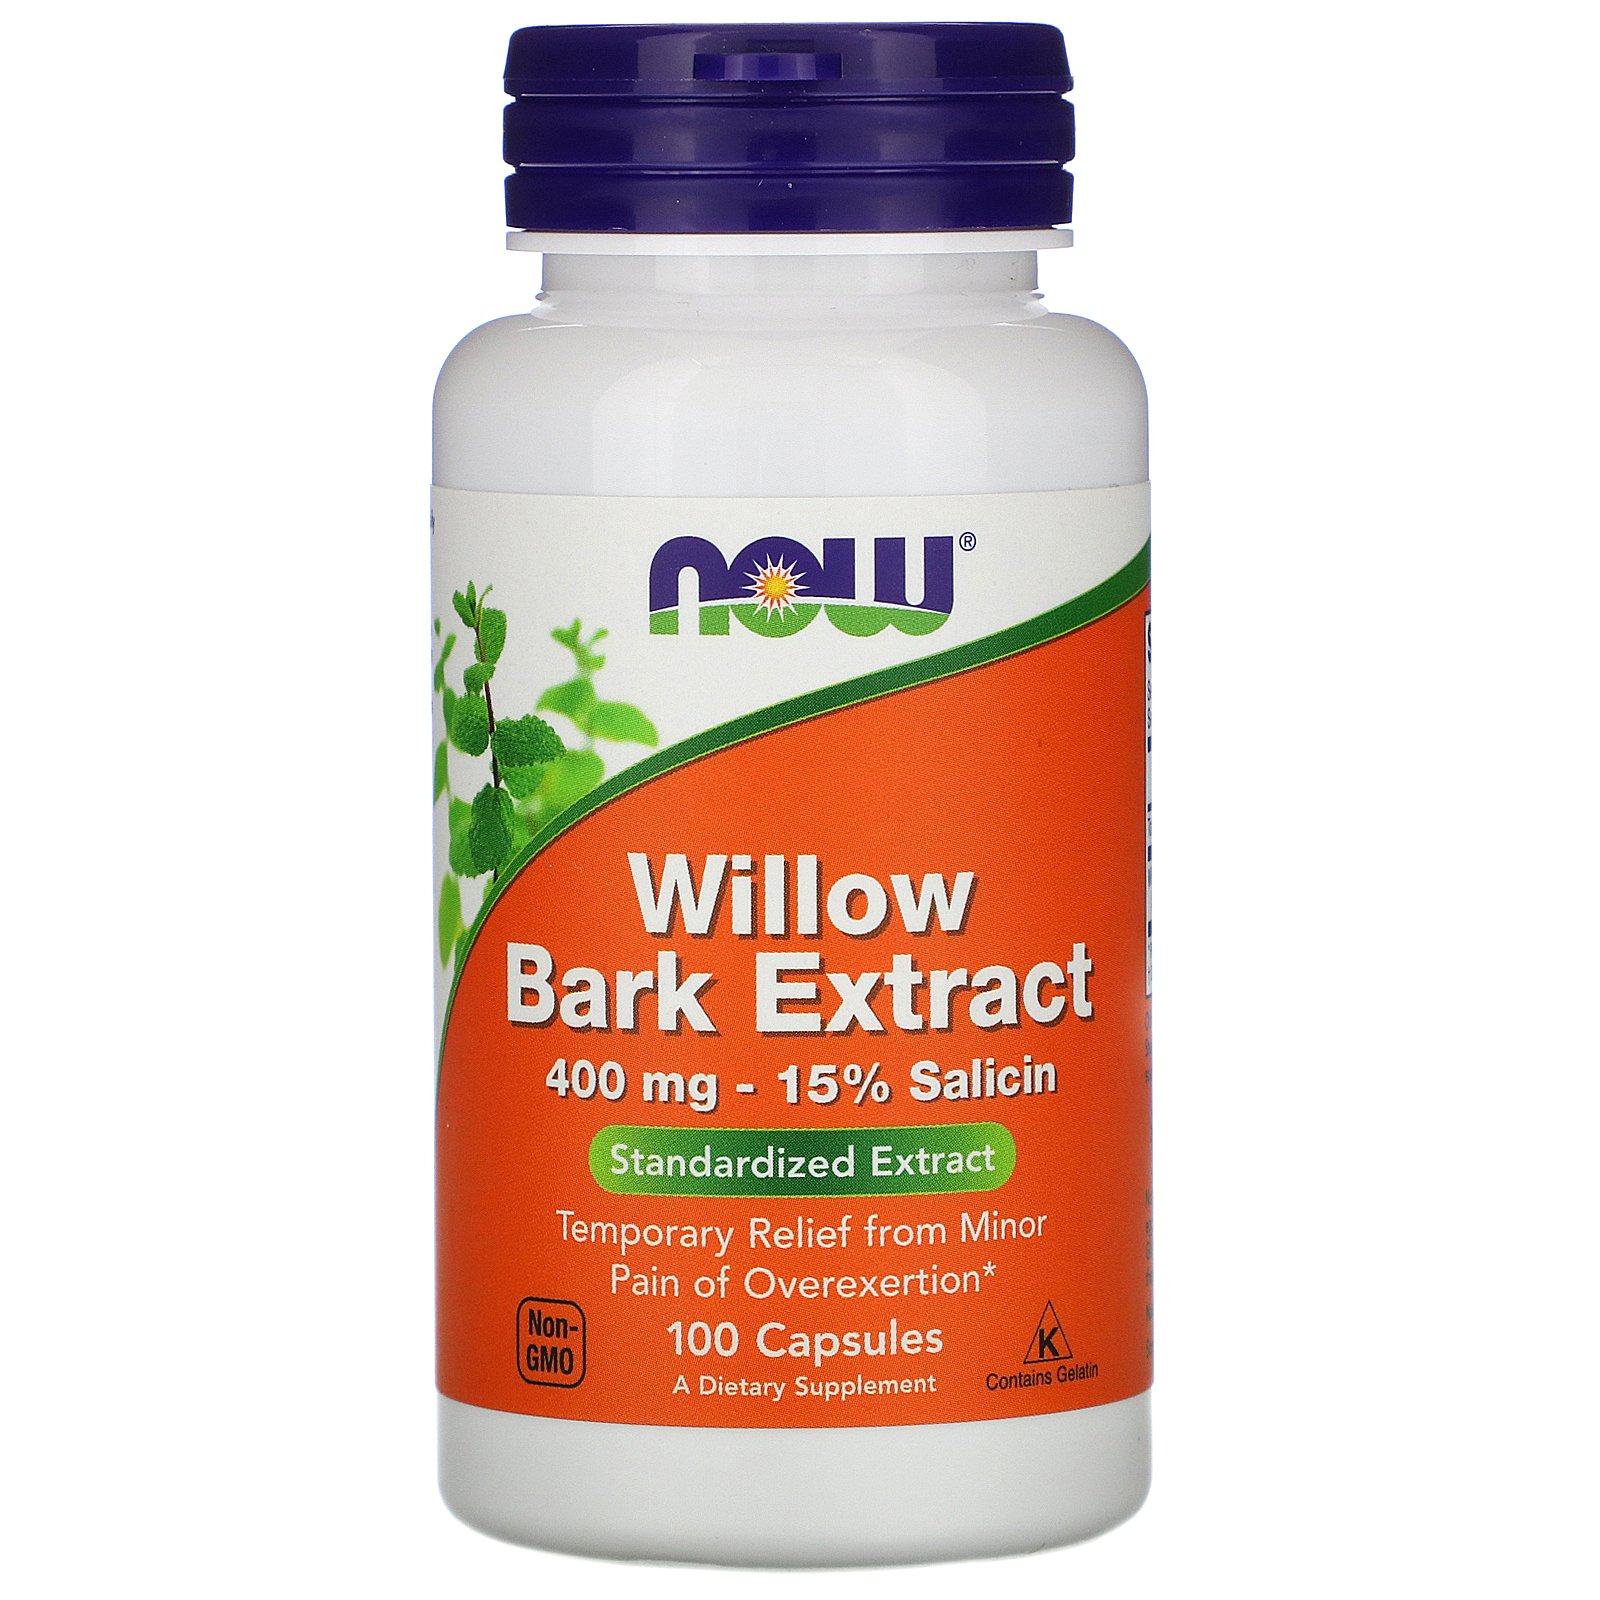 Willow Bark Extract, Кора Ивы Экстракт 400 мг - 100 капсул